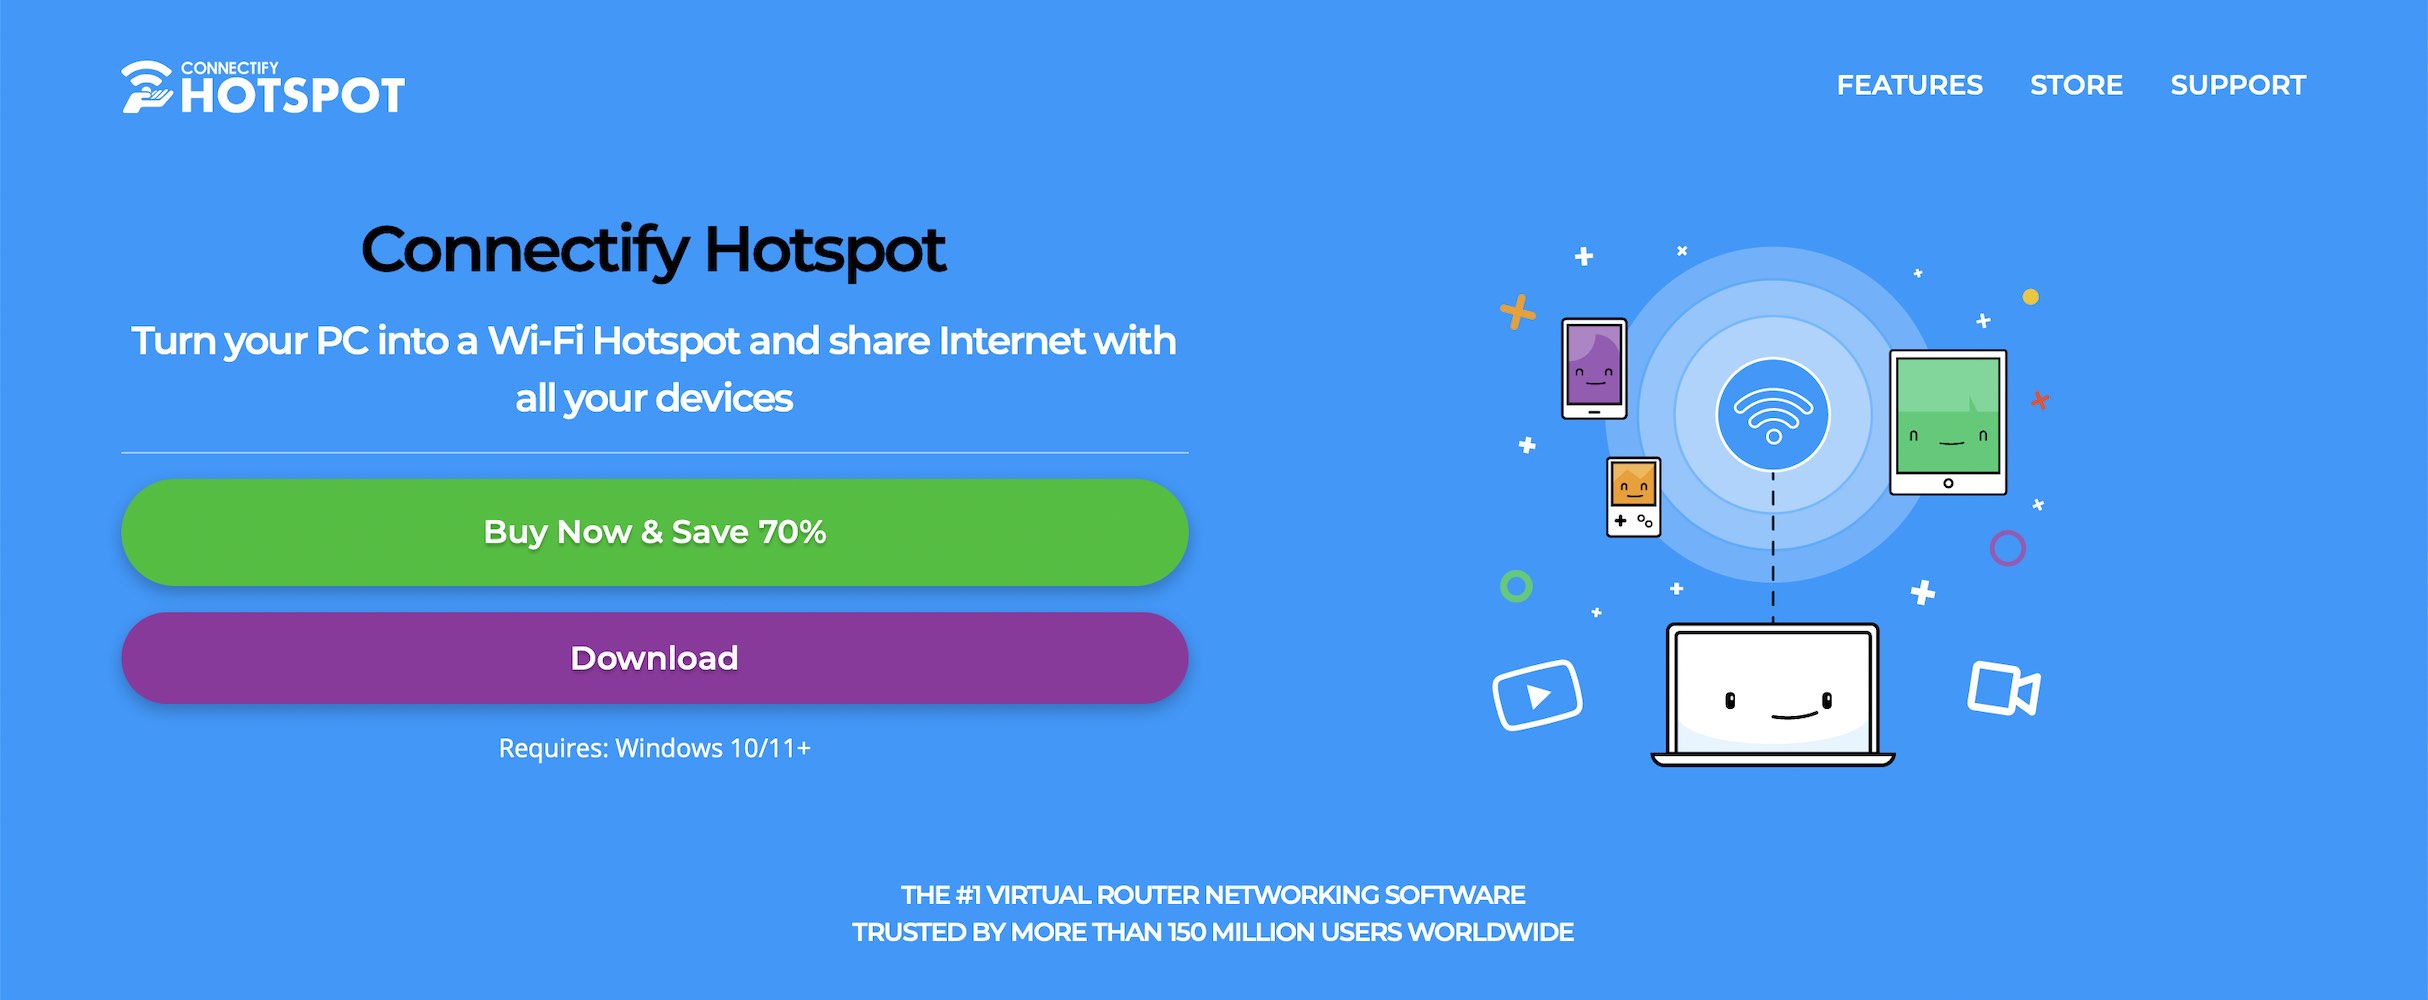 Download the Connectify Hotspot app from the official website